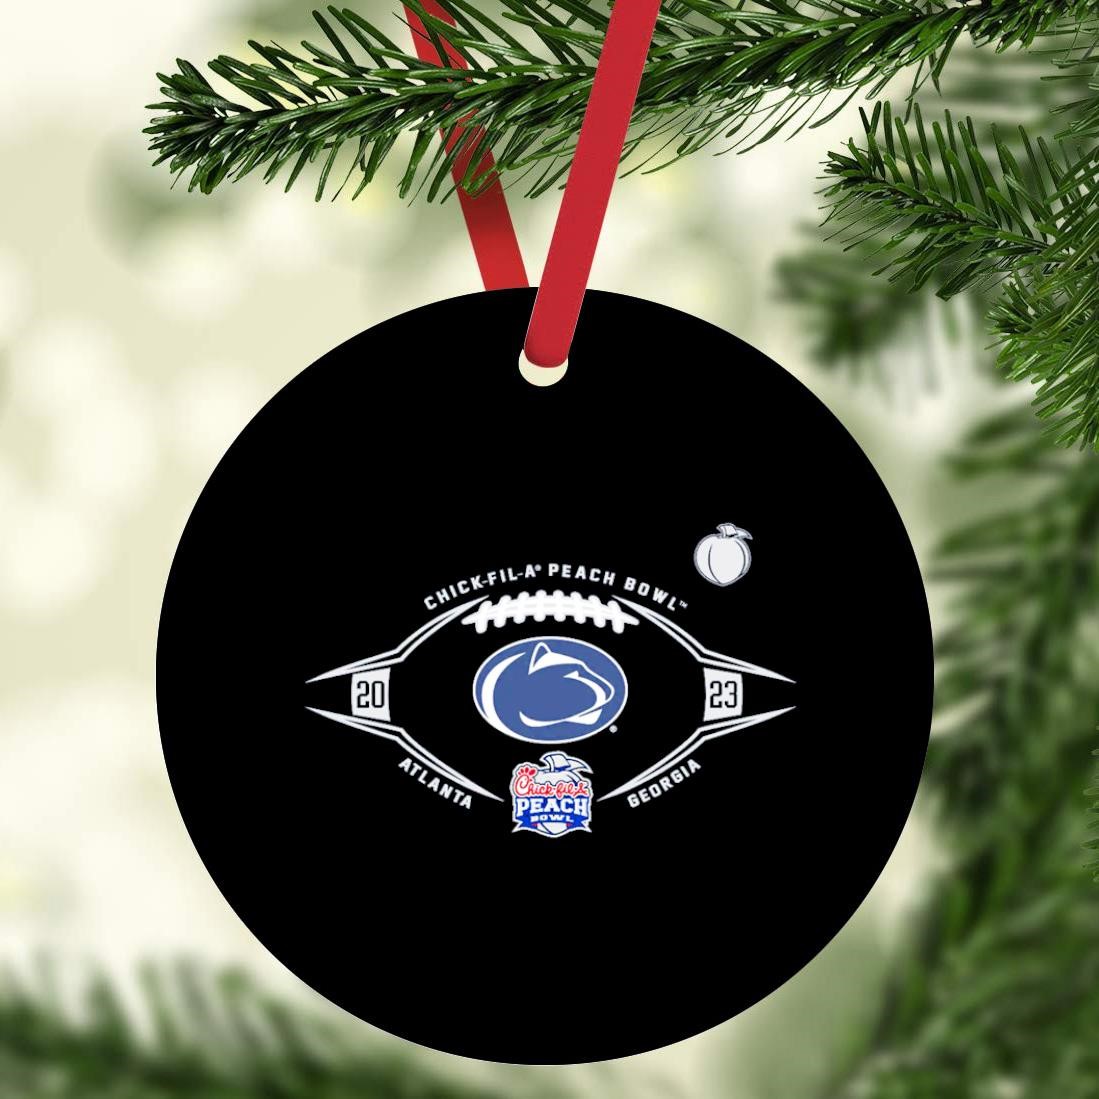 https://images.nicefrogtees.com/2023/12/Penn-State-Nittany-Lions-2023-Chick-fil-A-Peach-Bowl-ornament-Ornament.jpg